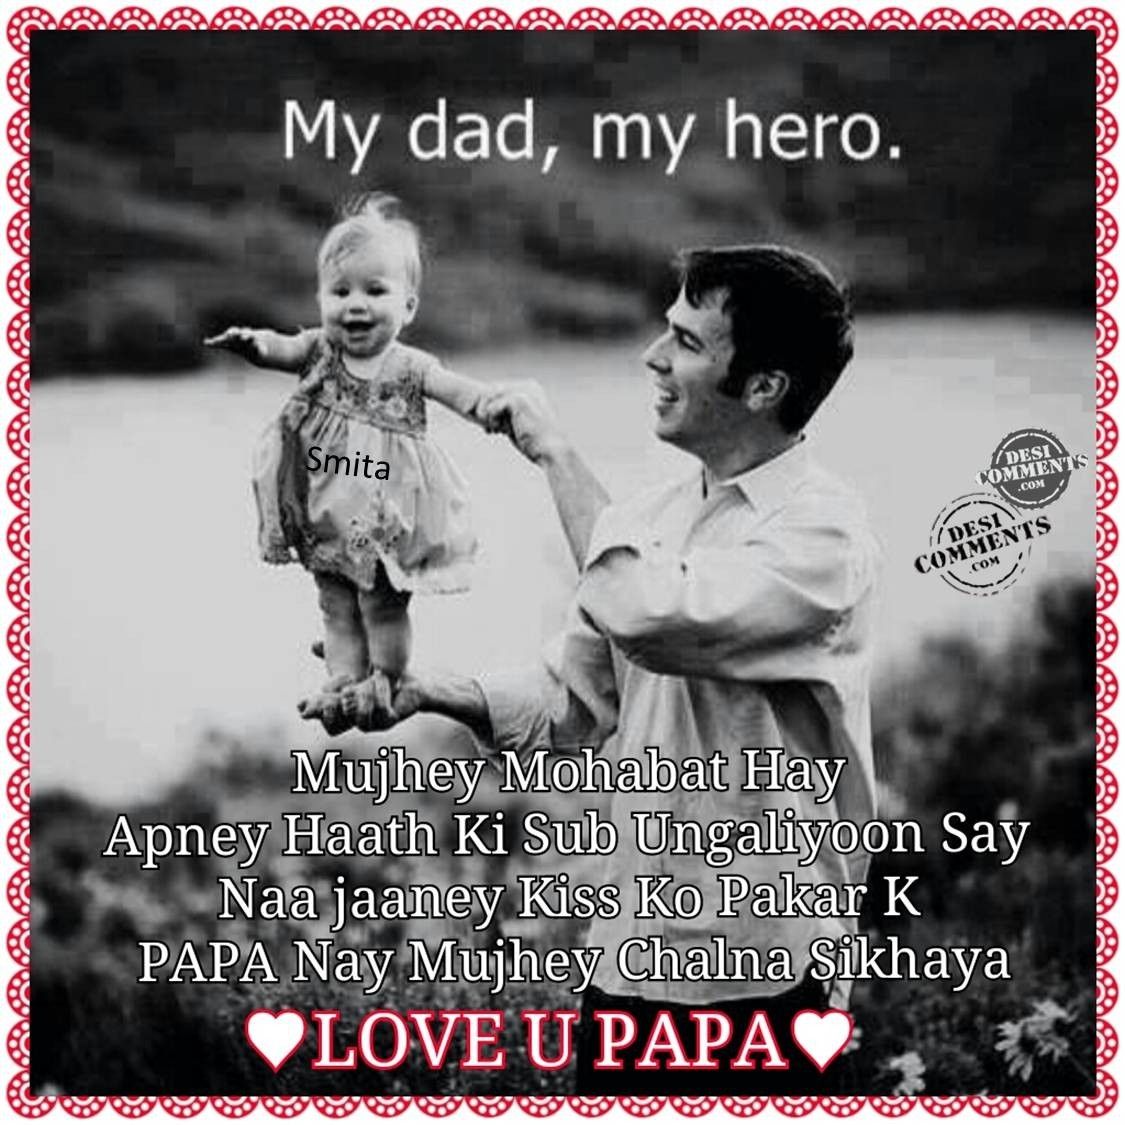 New Love U Papa Quotes. Love quotes collection within HD image